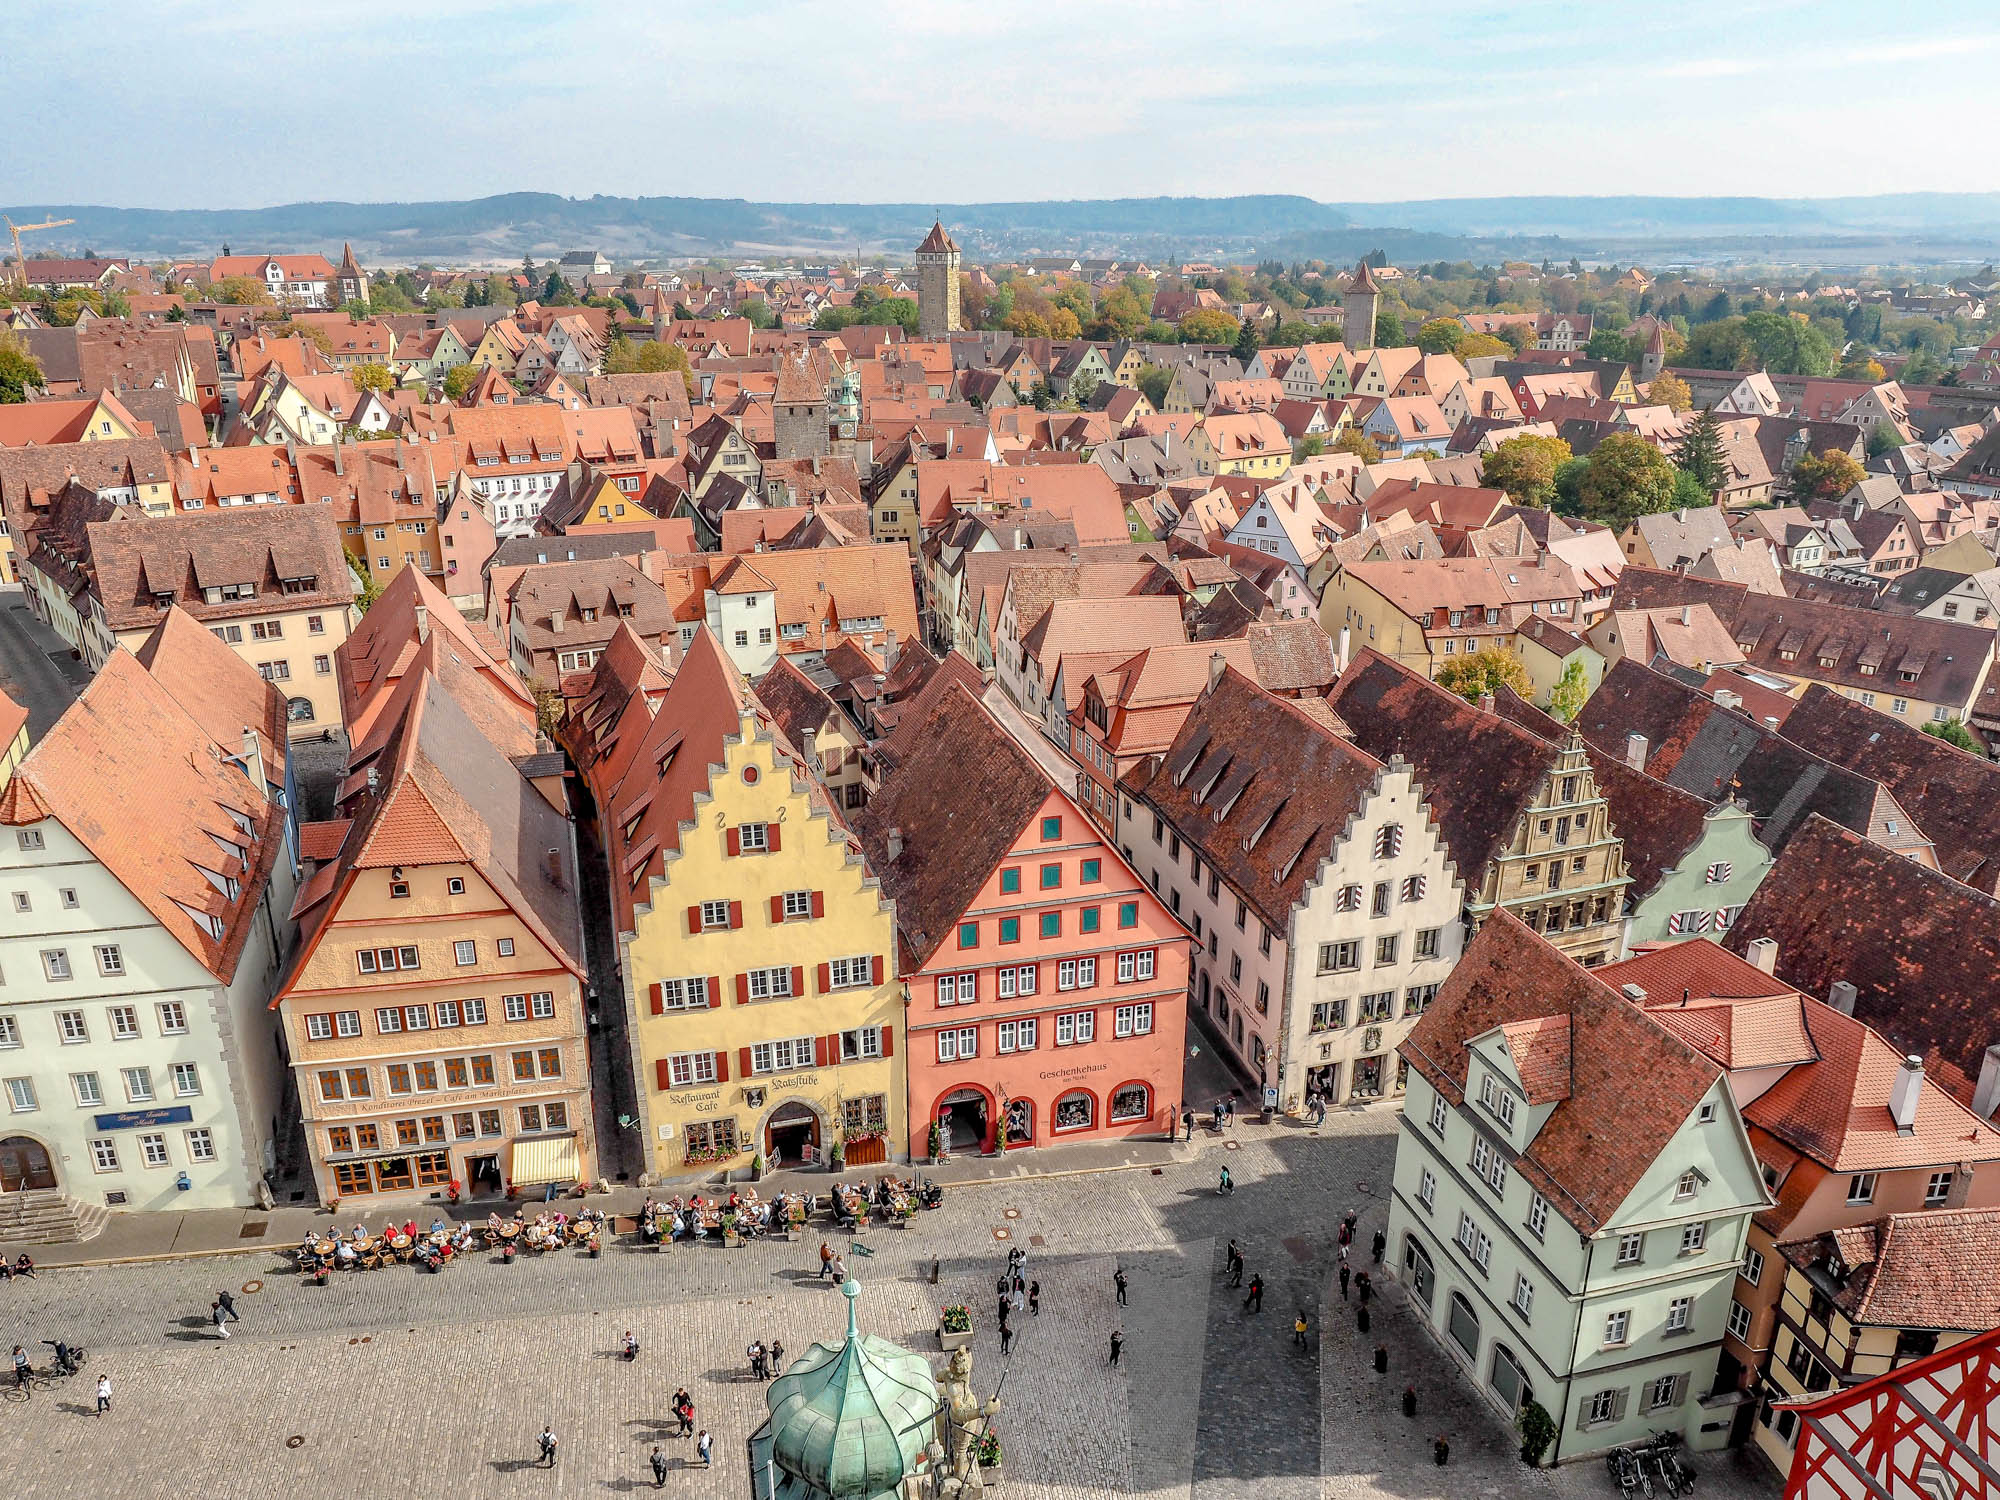 One day in Rothenburg ob der Tauber: The Best Day Trip Itinerary